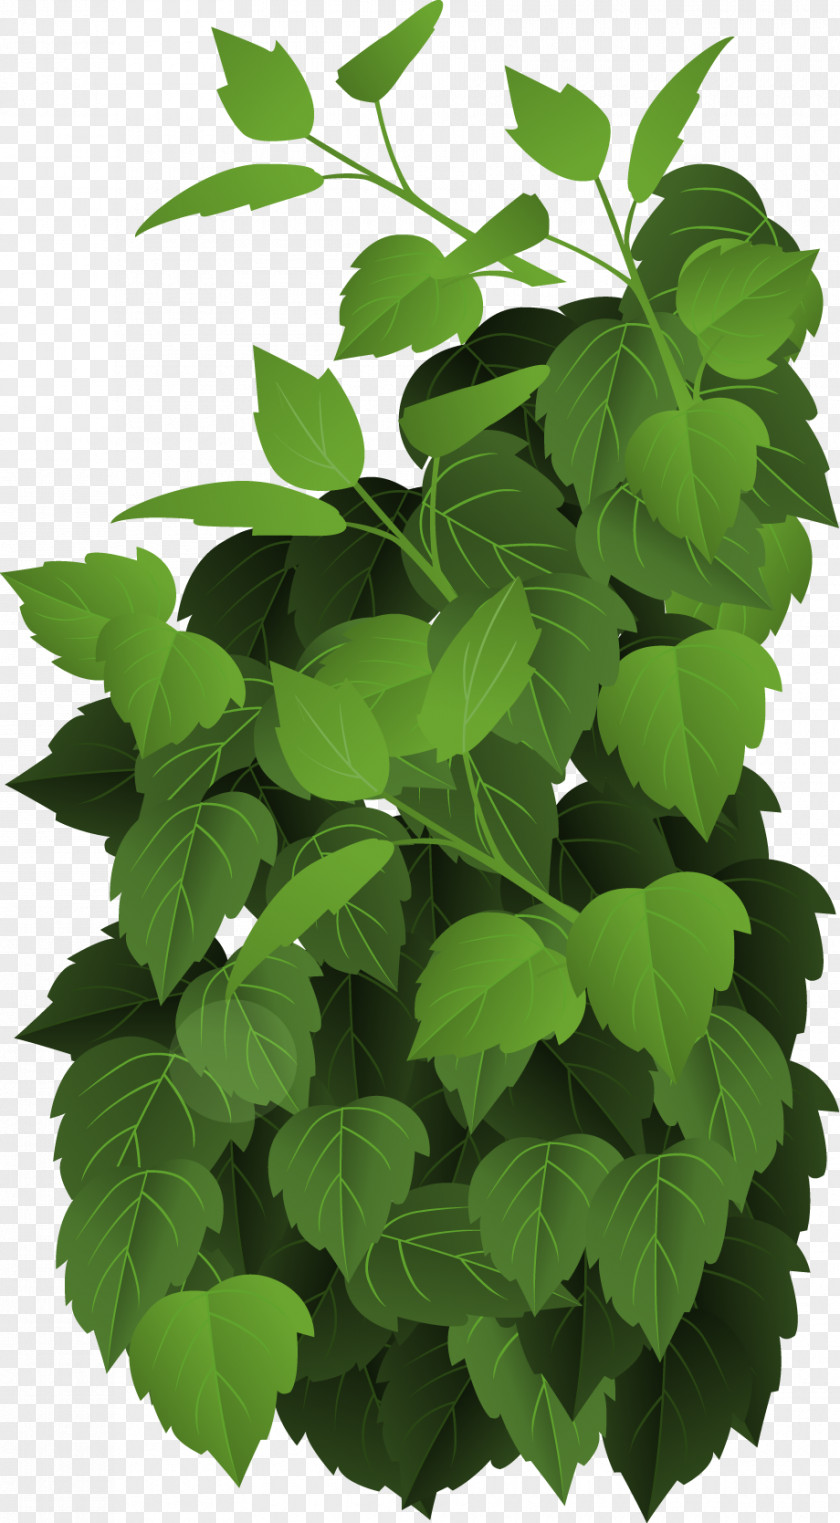 Leaves Tropical Rainforest Royalty-free Illustration PNG